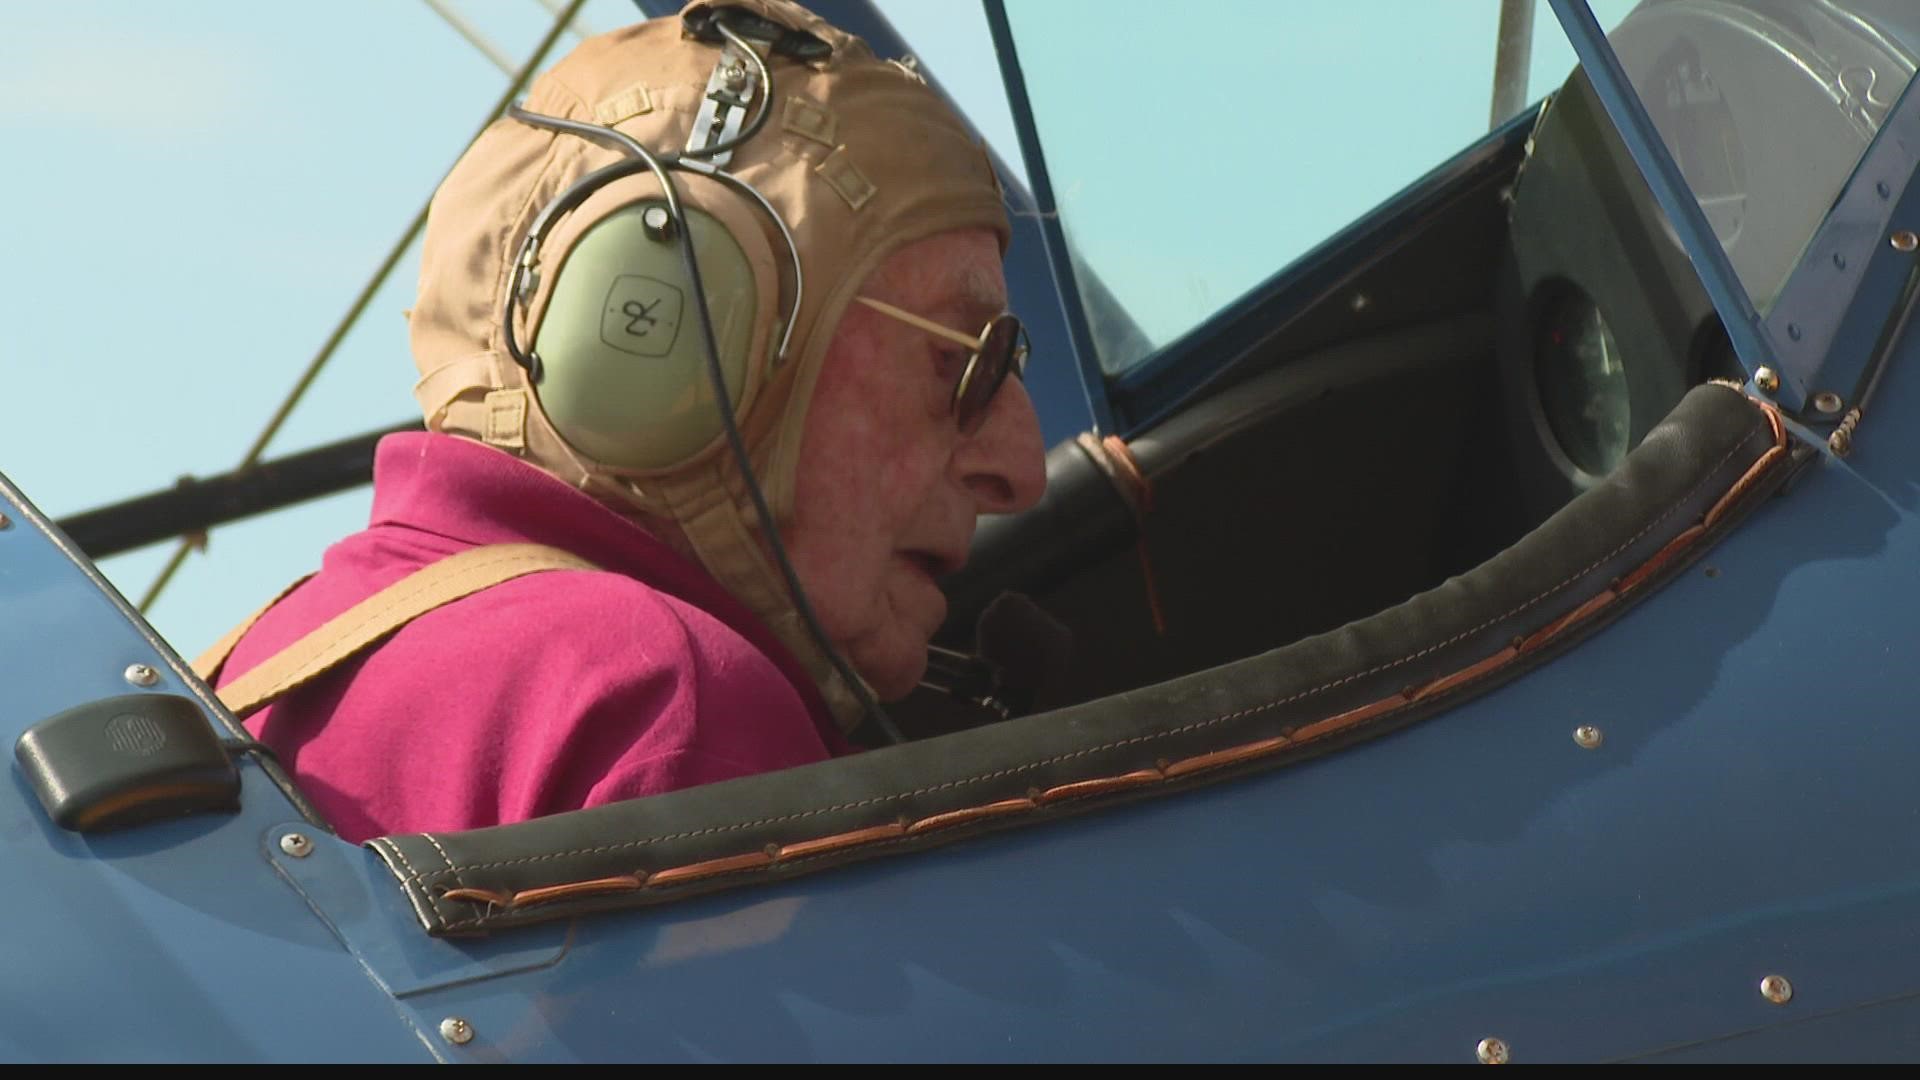 Jim Reynolds' ride Saturday took place in a plane similar to one he flew in the 1940s.